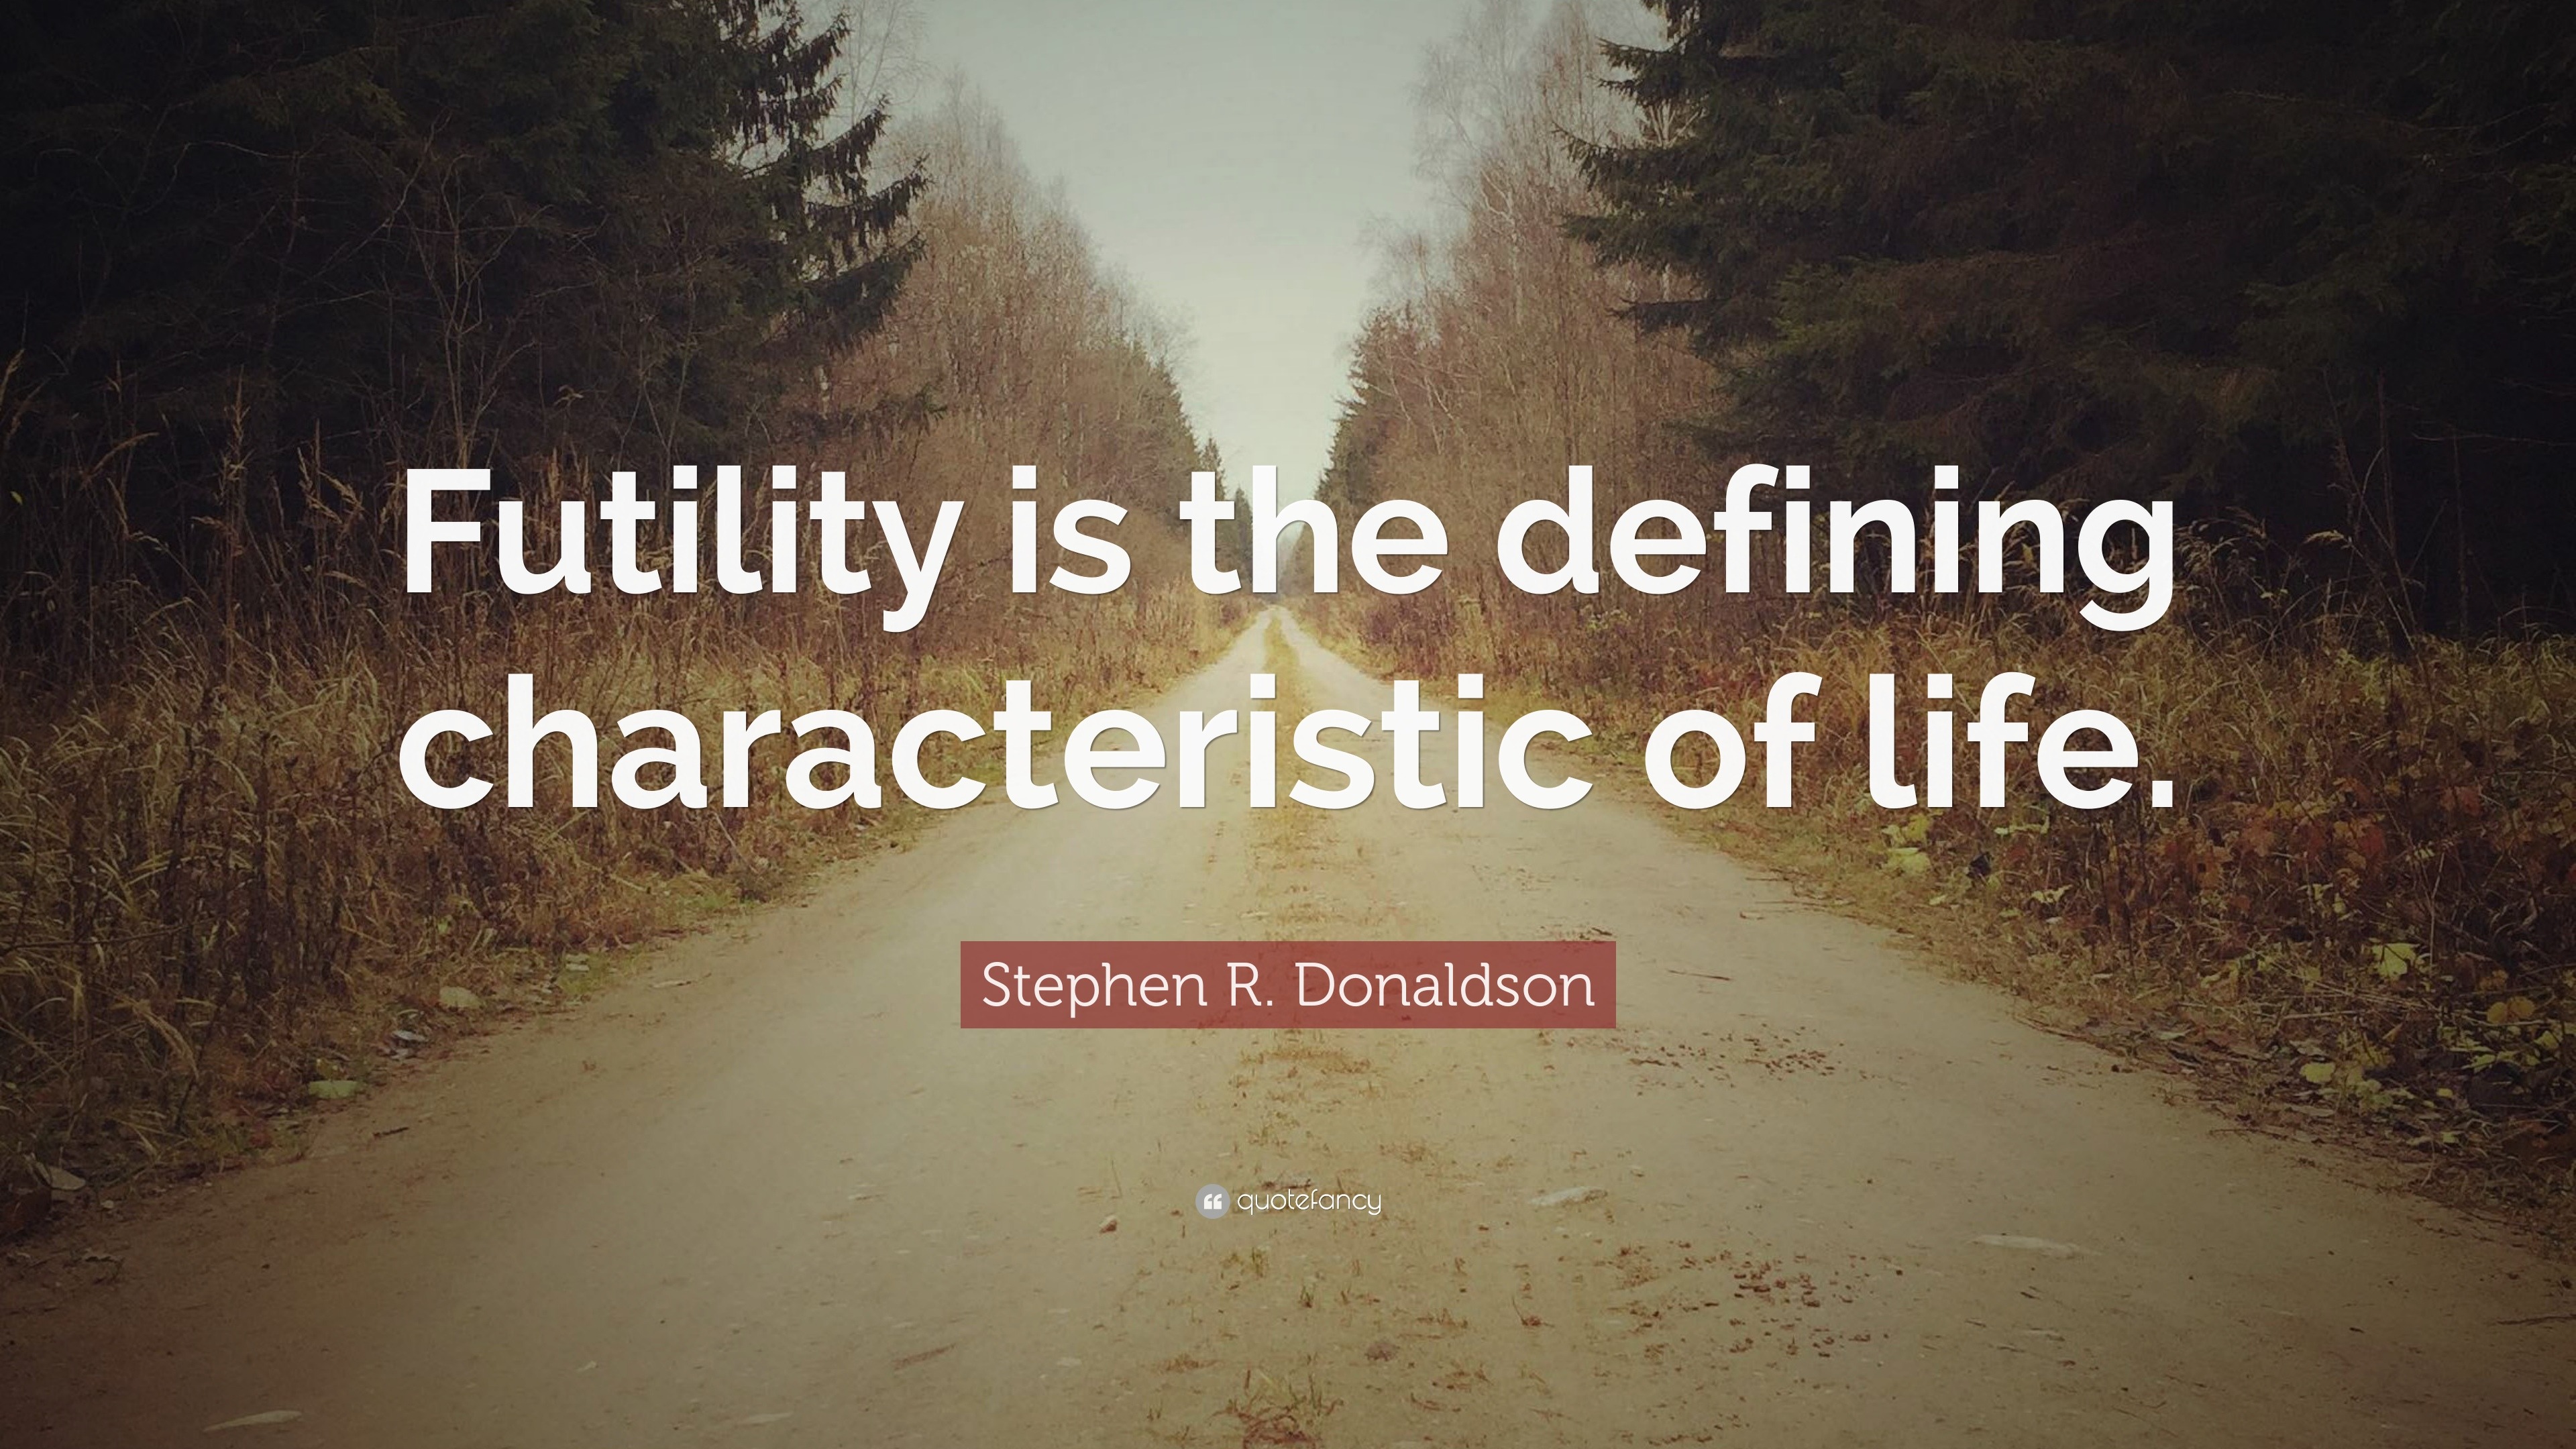 Stephen R. Donaldson Quote: “Futility is the defining characteristic of